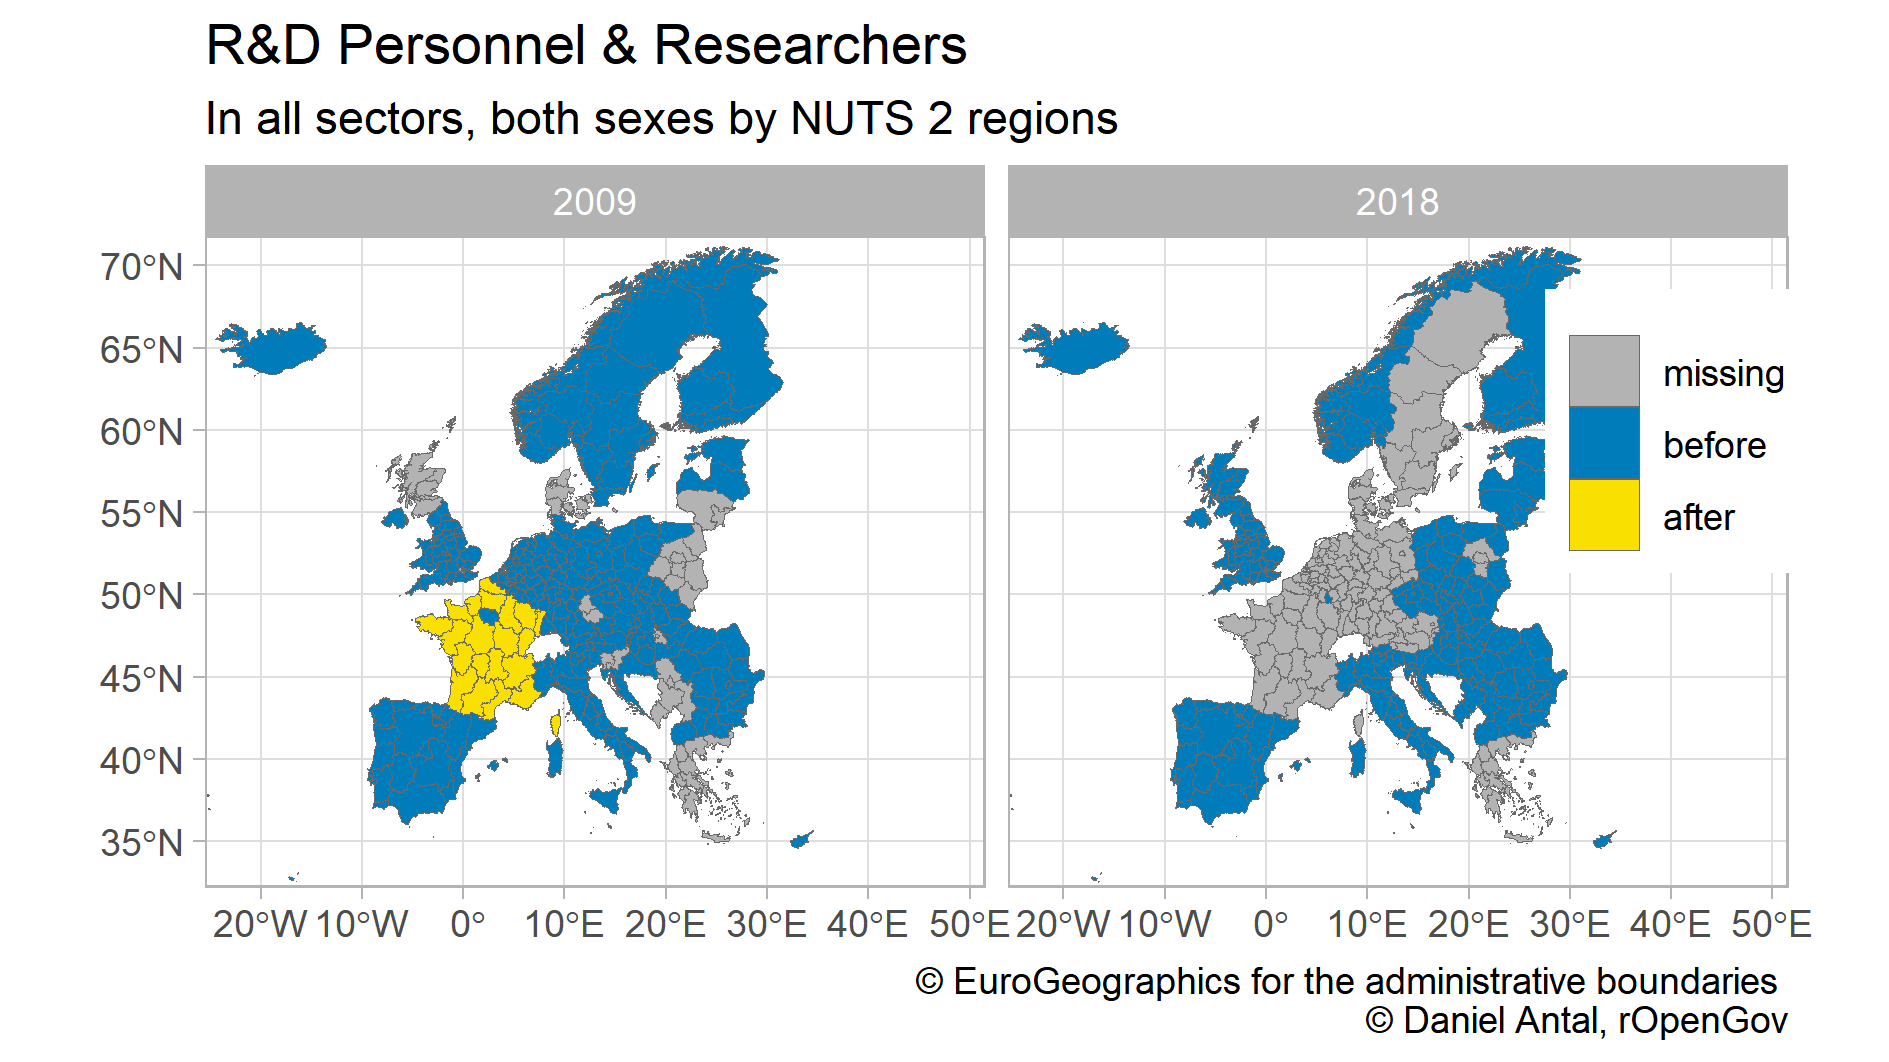 Our [regions R package](https://regions.dataobservatory.eu/) helps the data processing, validation and imputation of sub-national, regional datasets and their coding.